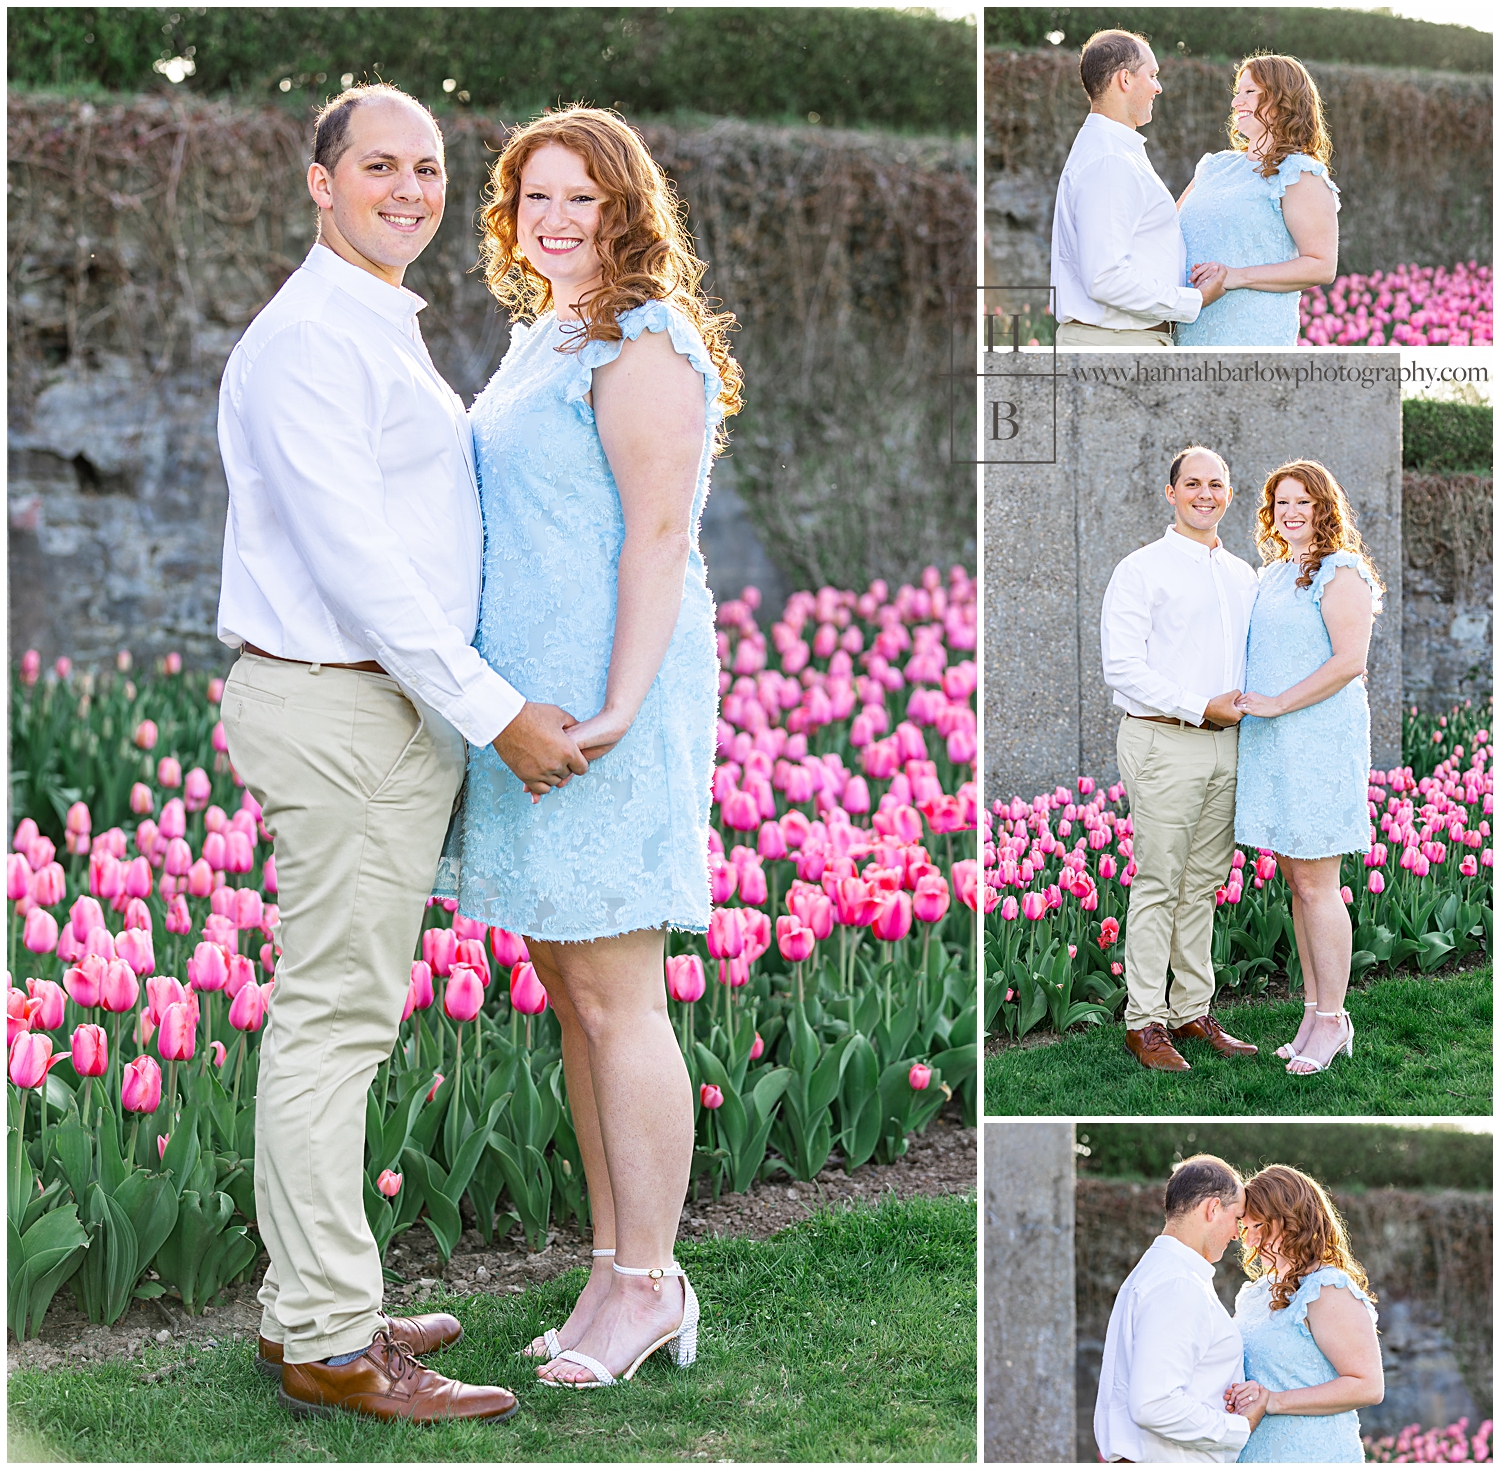 Woman in blue dress poses with fiance near pink tulip bed.